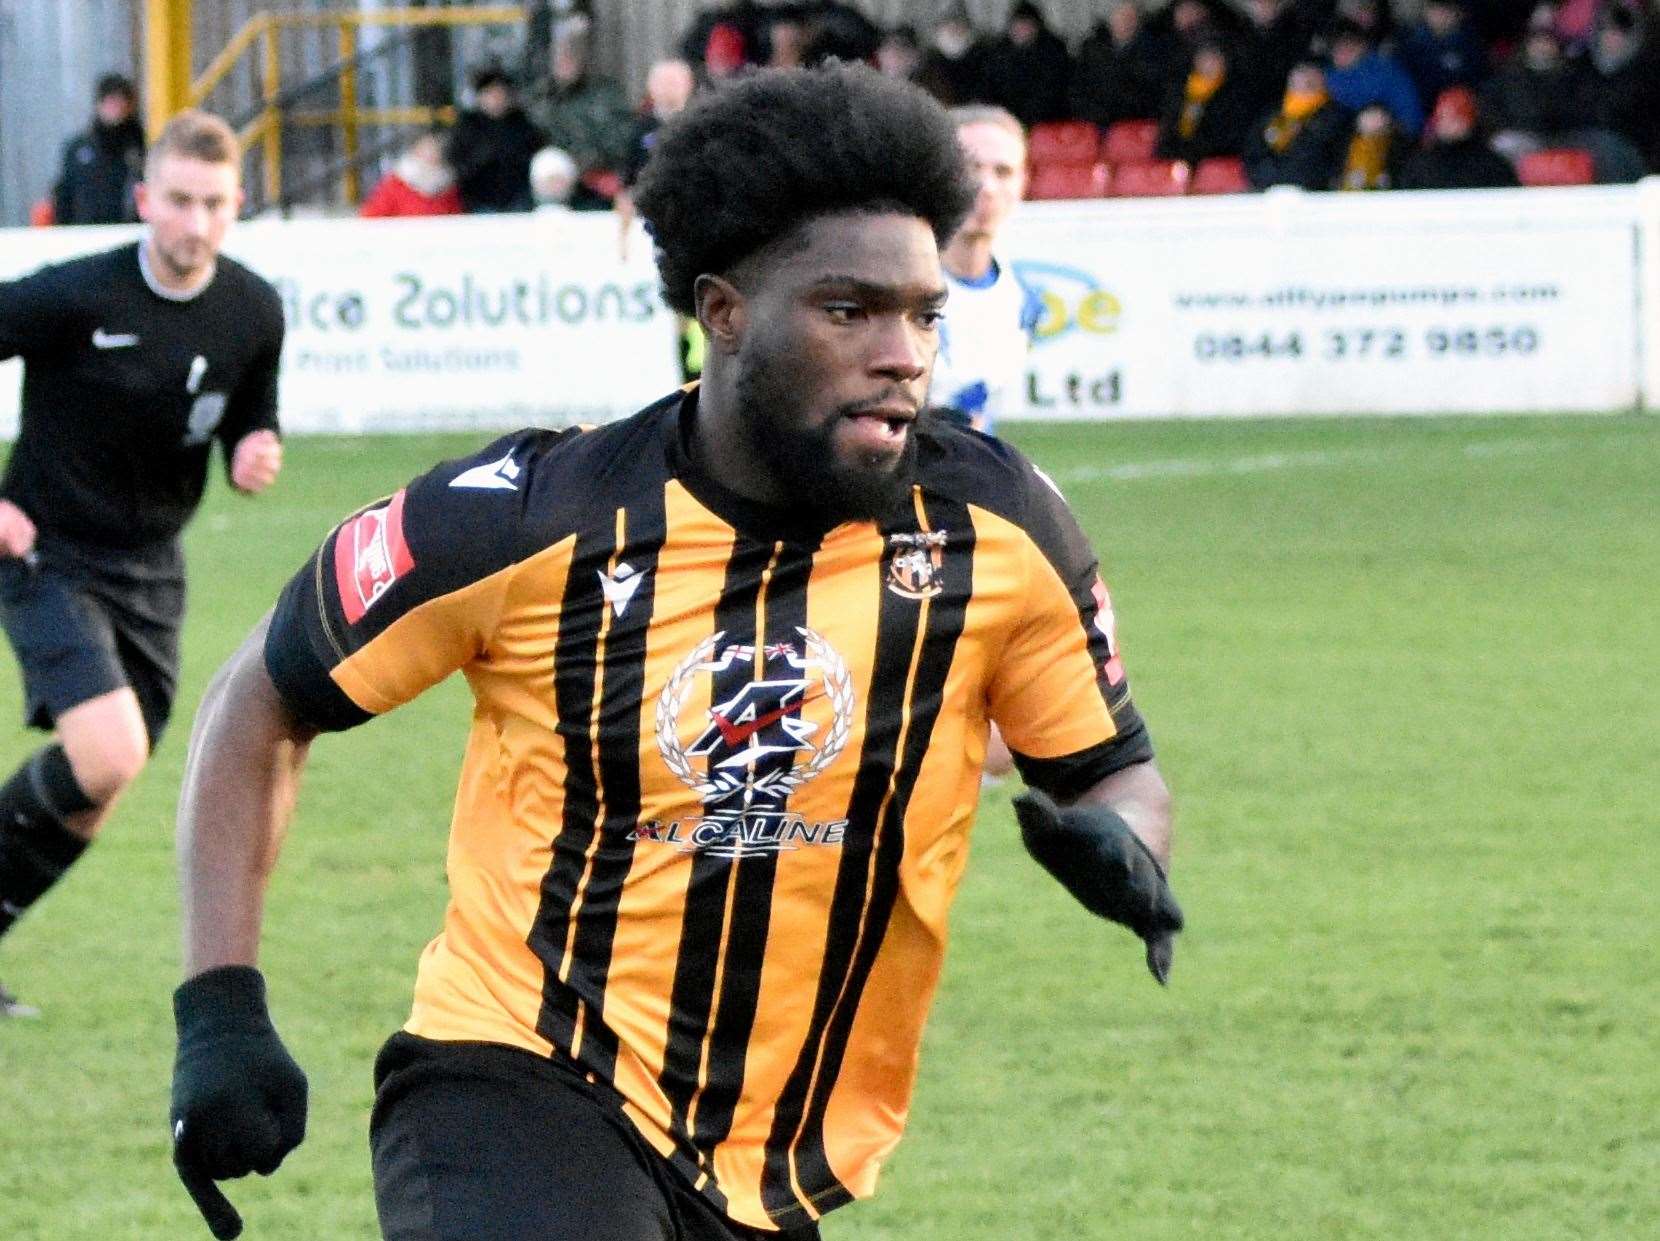 Folkestone striker Dave Smith – scored in last Tuesday’s controversial 2-2 Isthmian Premier draw at home to Cray Wanderers. Picture: Randolph File